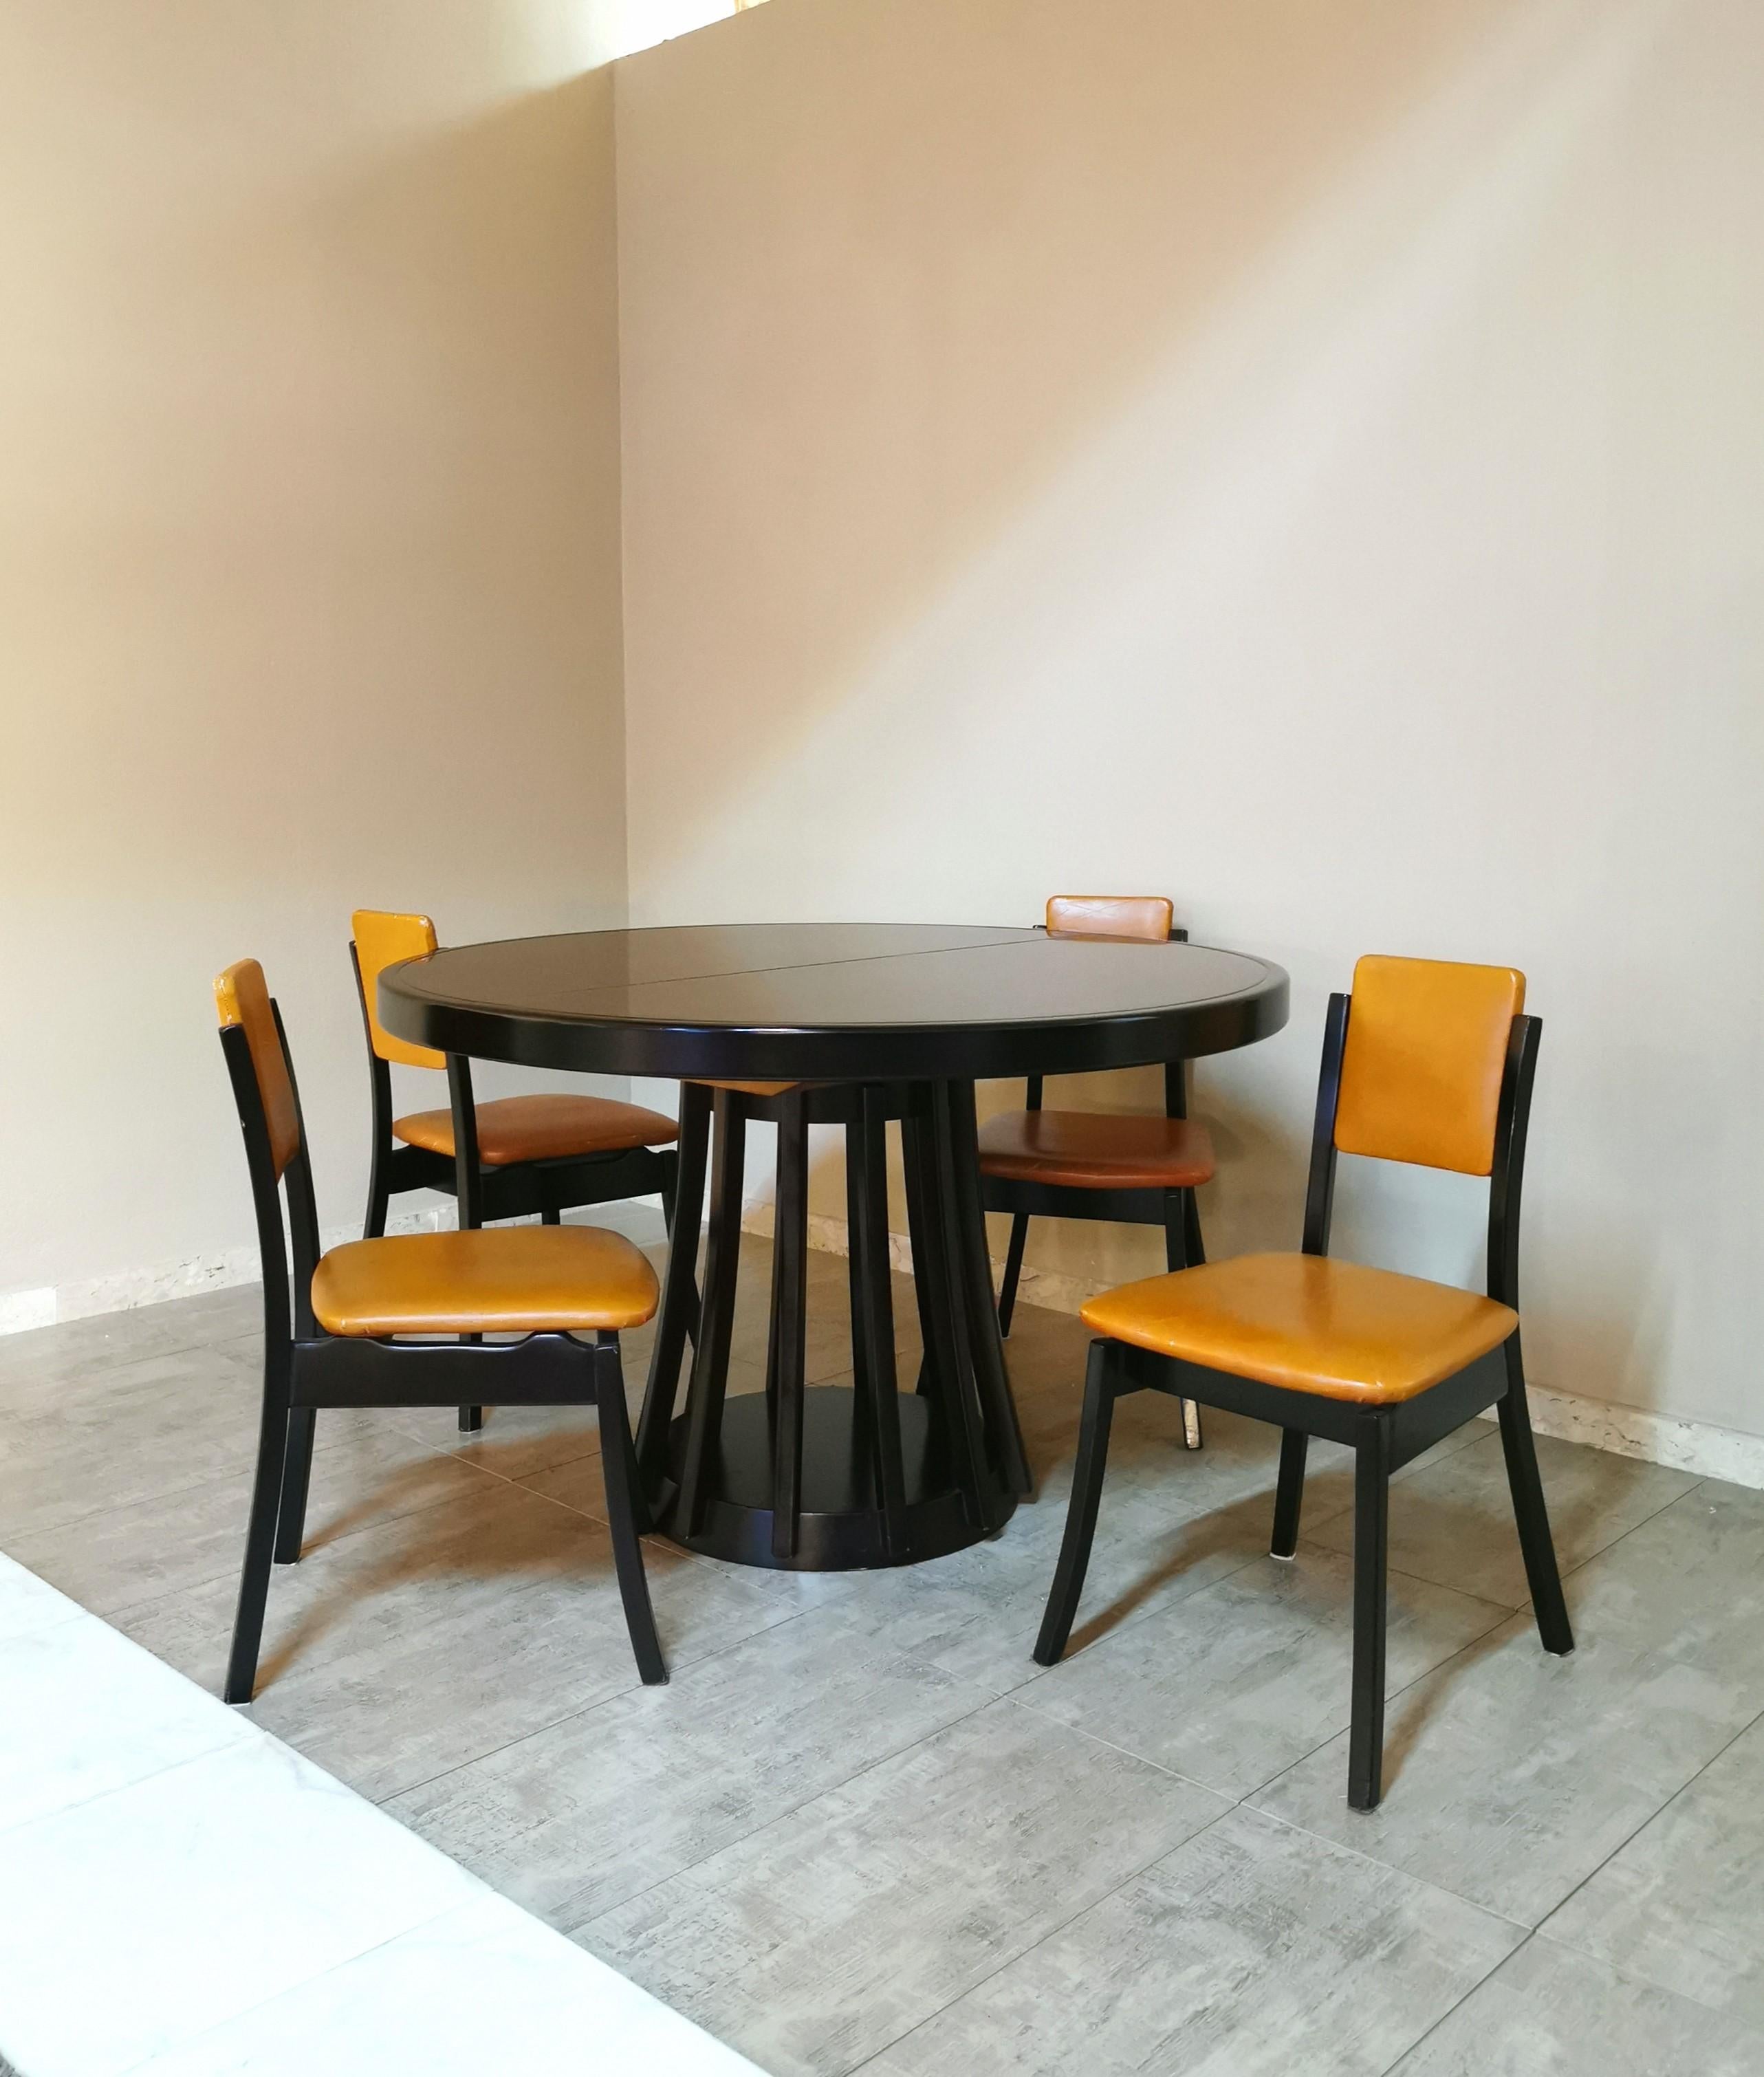 Coordinated set of 4 dining chairs and 1 table designed by the renowned Italian designer Angelo Mangiarotti in the 70s. The chairs have a dark-toned wooden structure with particular legs that curve outwards. The seat and back are covered in